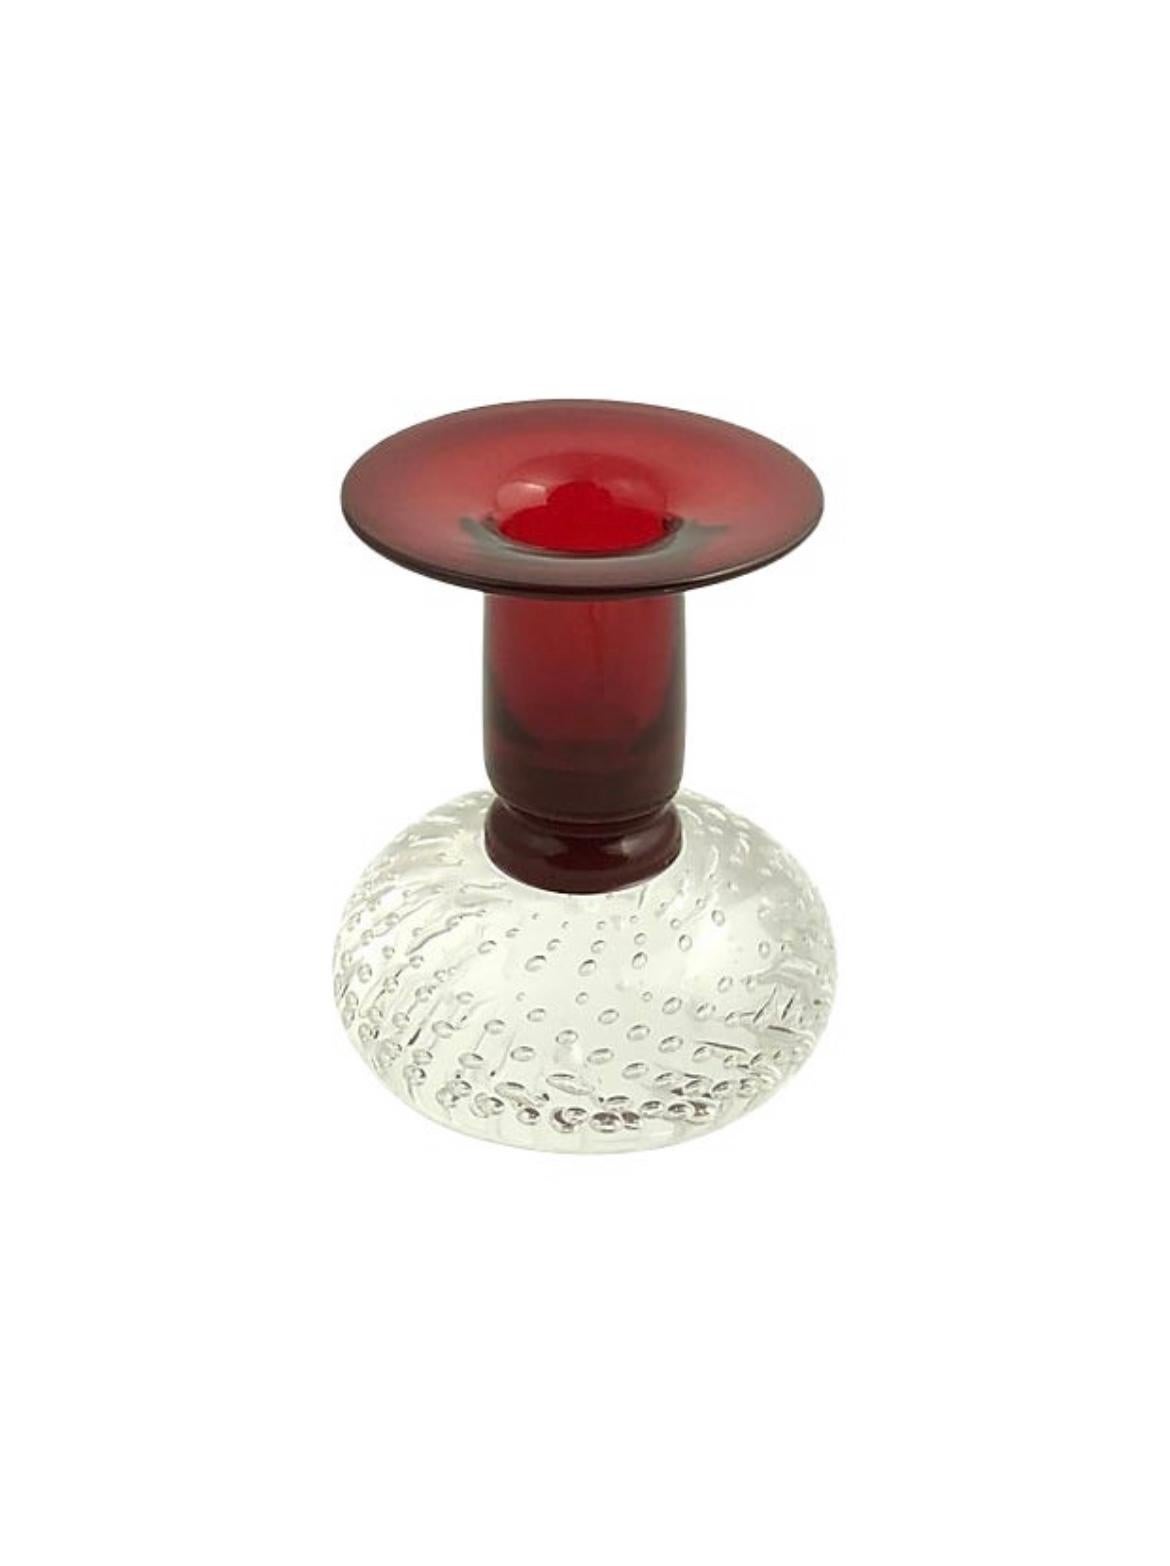 Pairpoint model VS-2224(B) red cornucopia vase with an applied controlled bubble base. Bubble base: 3